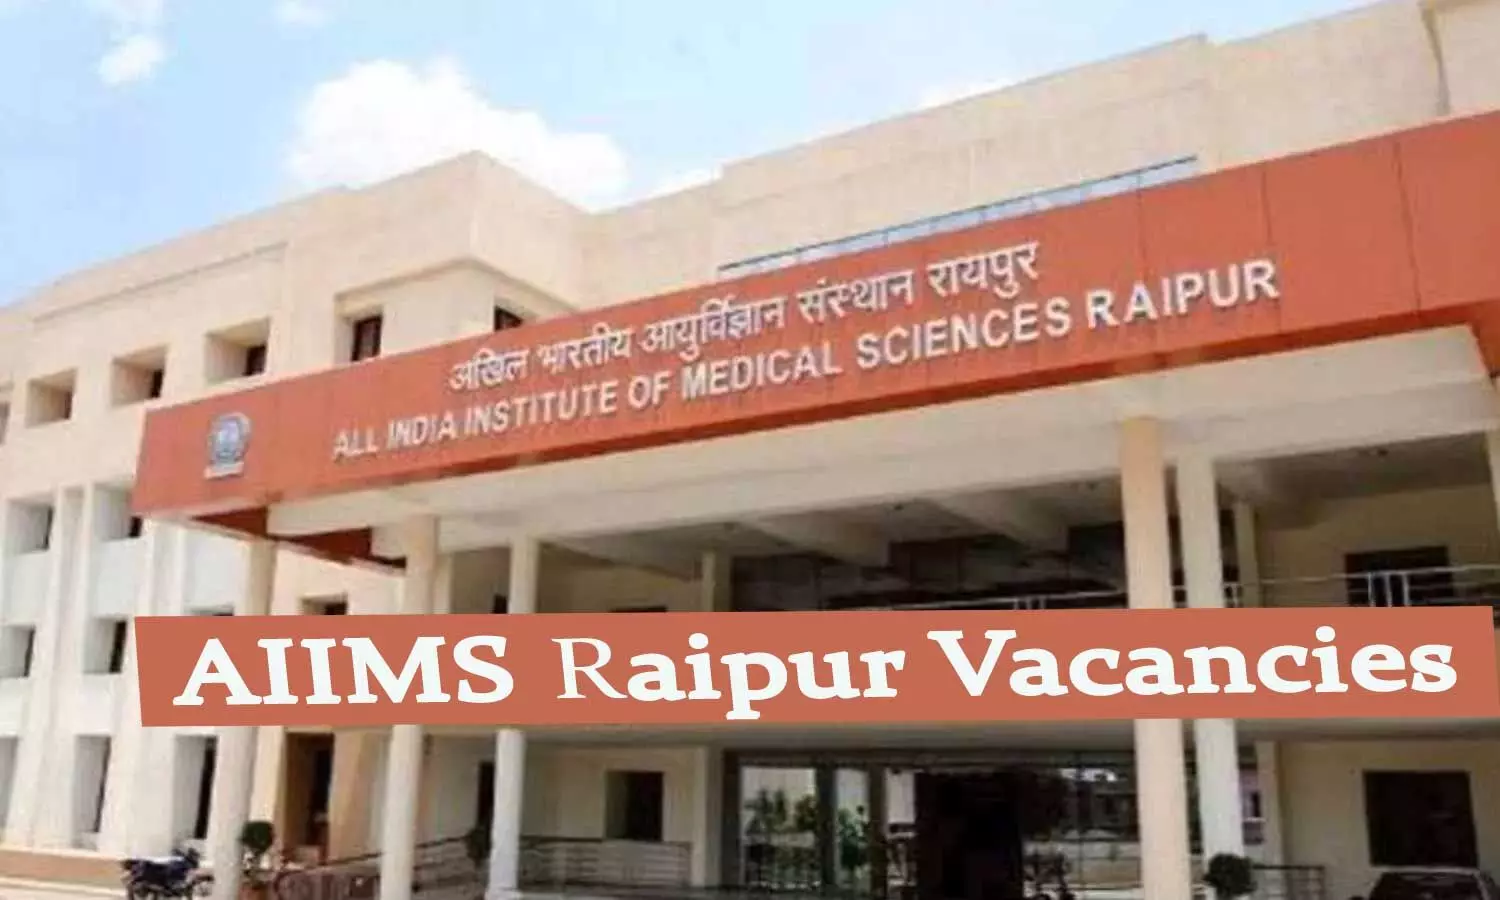 Apply Now At AIIMS Raipur: Vacancies released For Assistant Professor Post In Various Depts